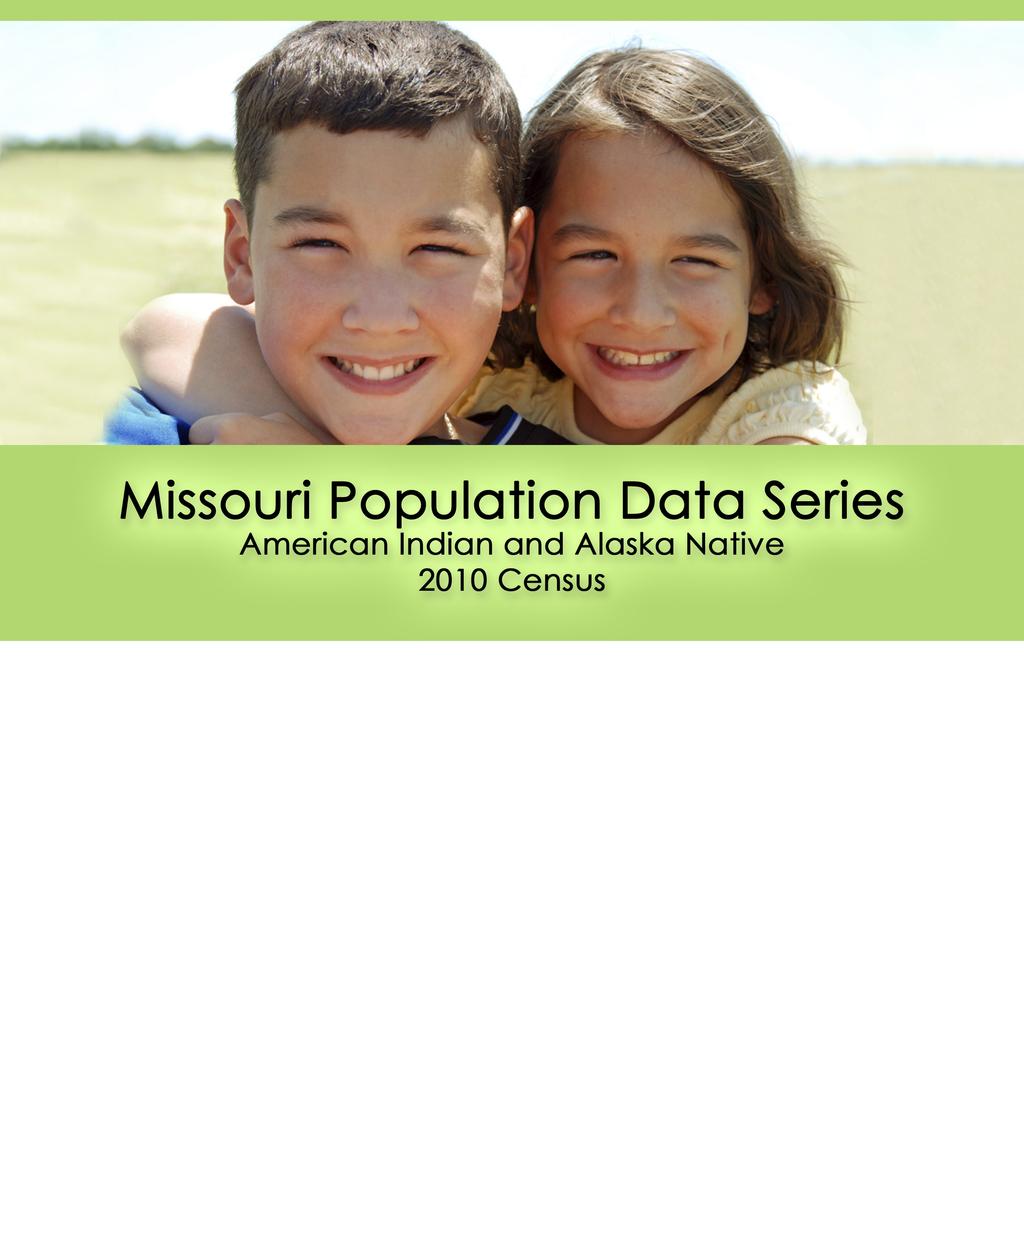 The 00 Decennial Census publishes regional population demographics for ethnicity, race and age groups.